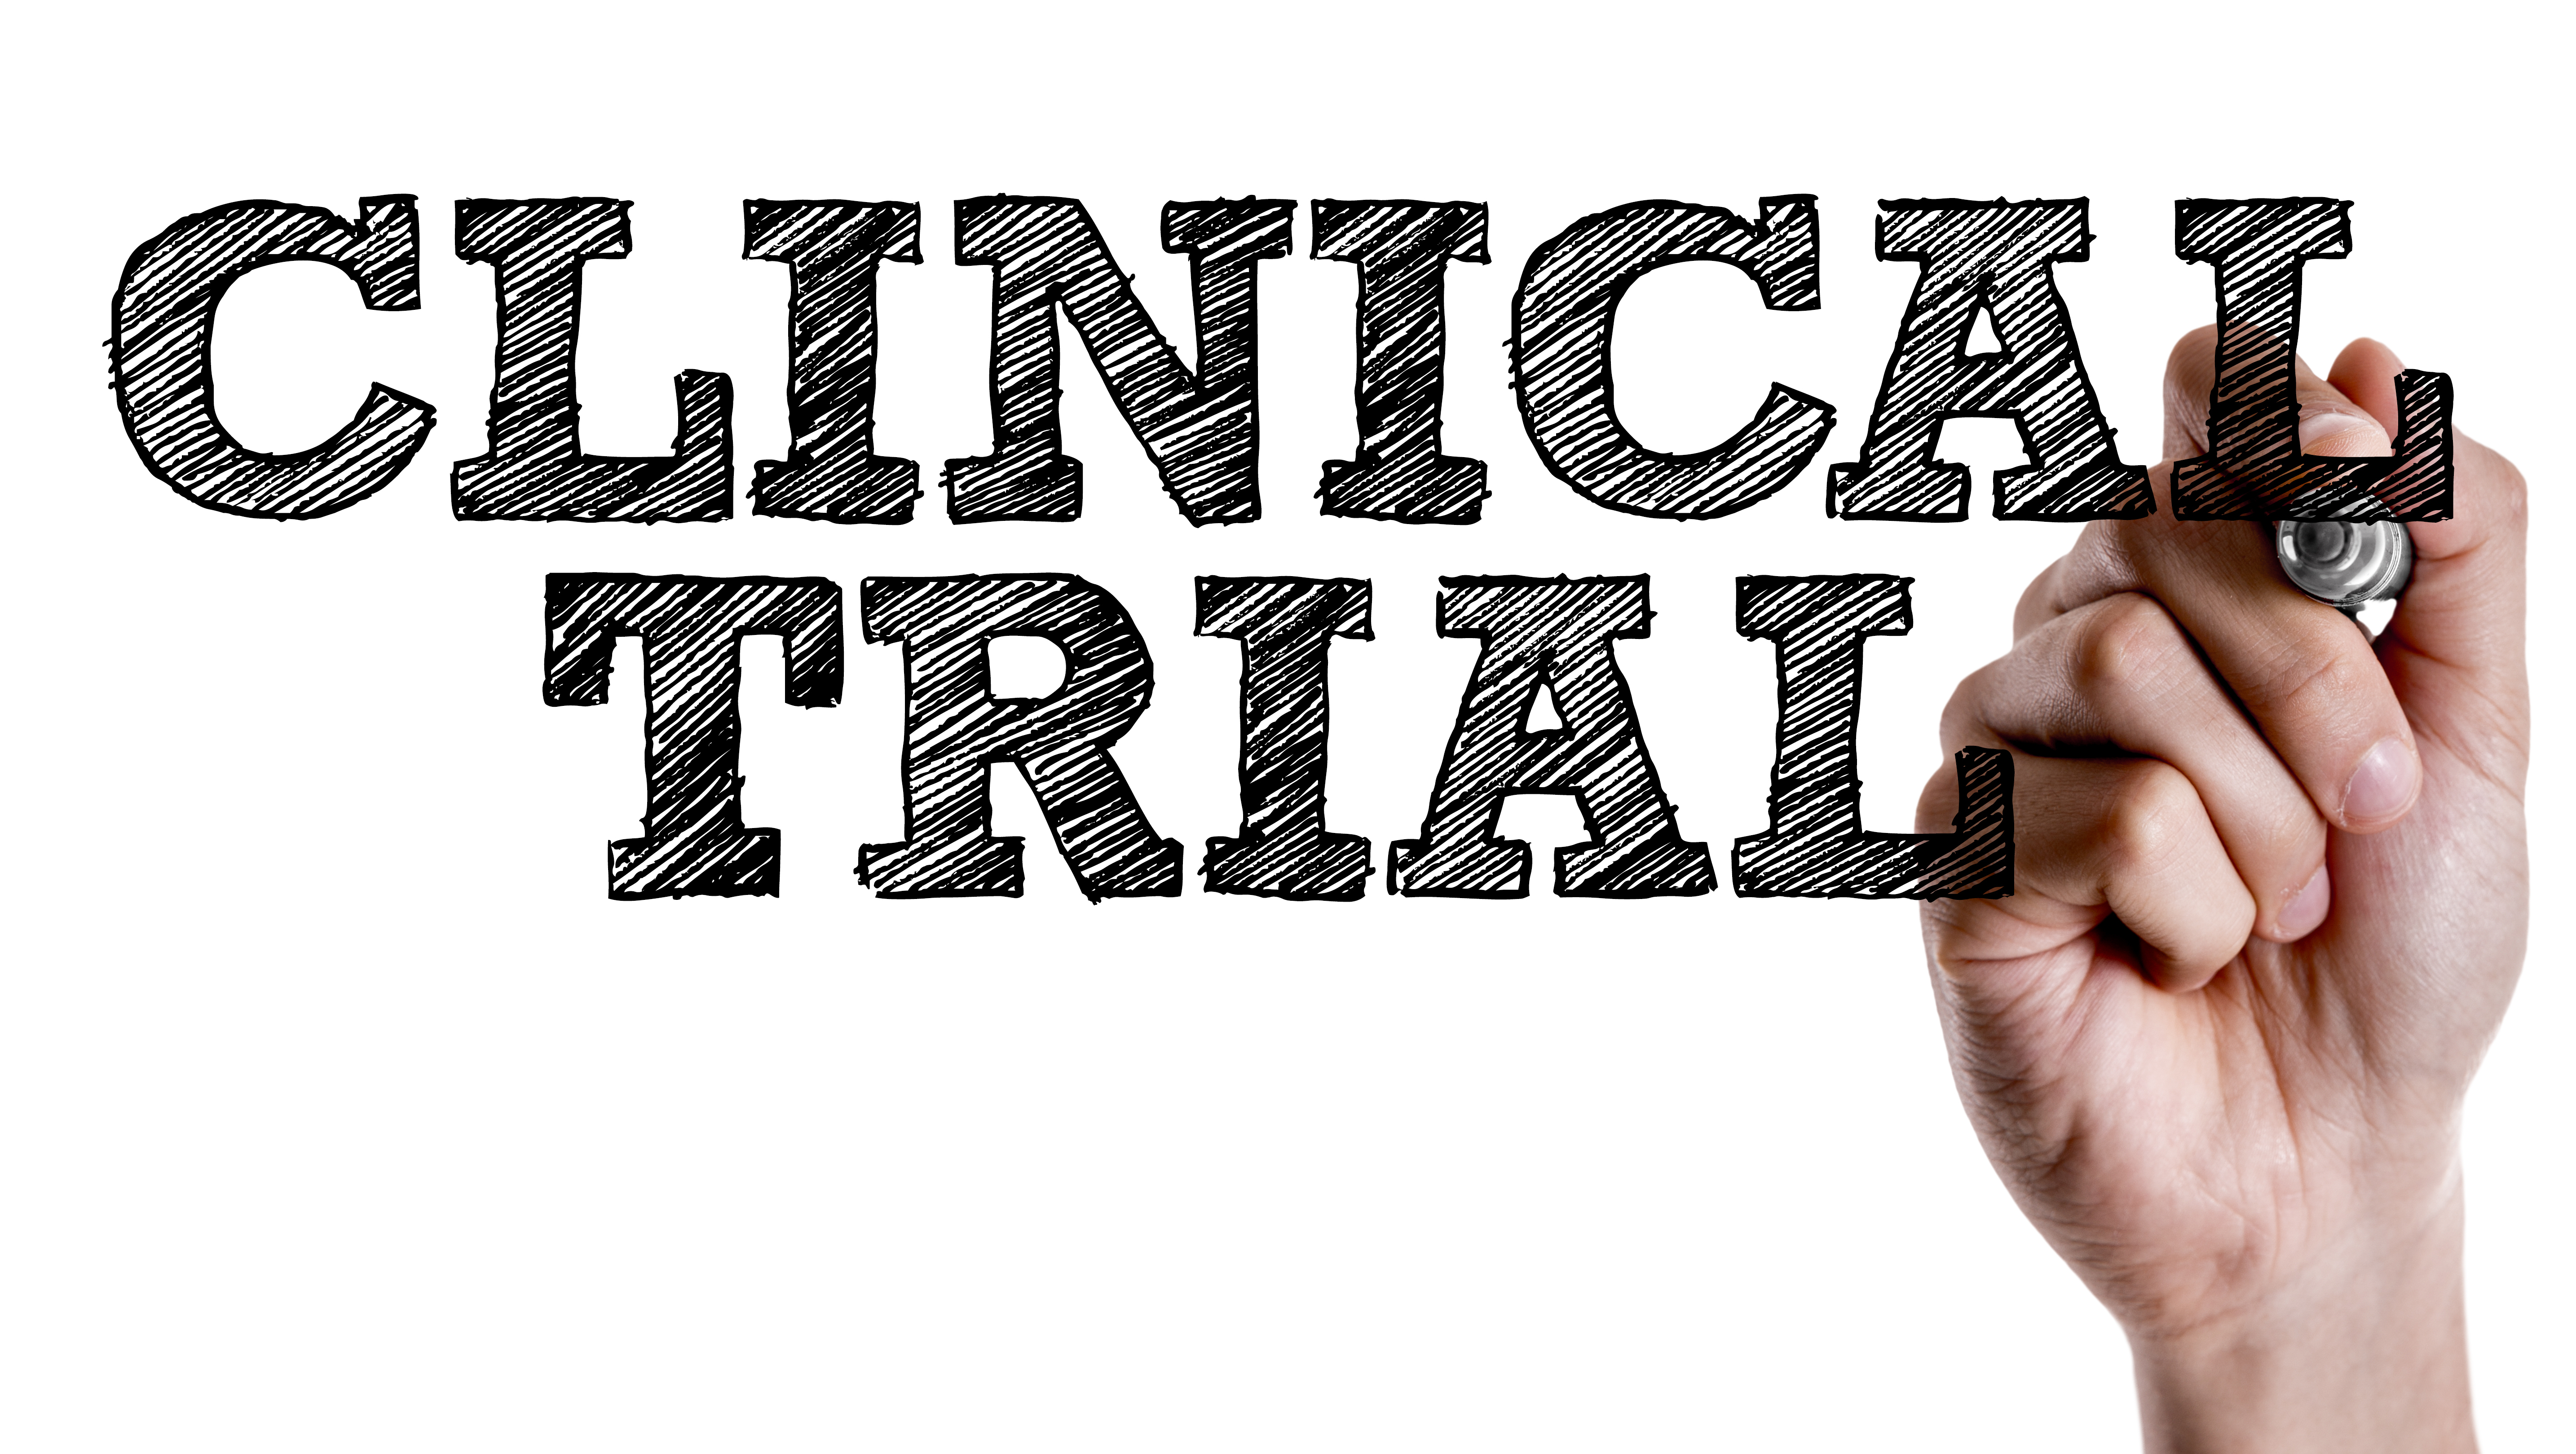 A new Phase 3 clinical trial exploring Anthera’s blisibimod was recently started, including patients with severe lupus, testing positive for antibodies against anti-double stranded DNA and low levels of immune factors called complement